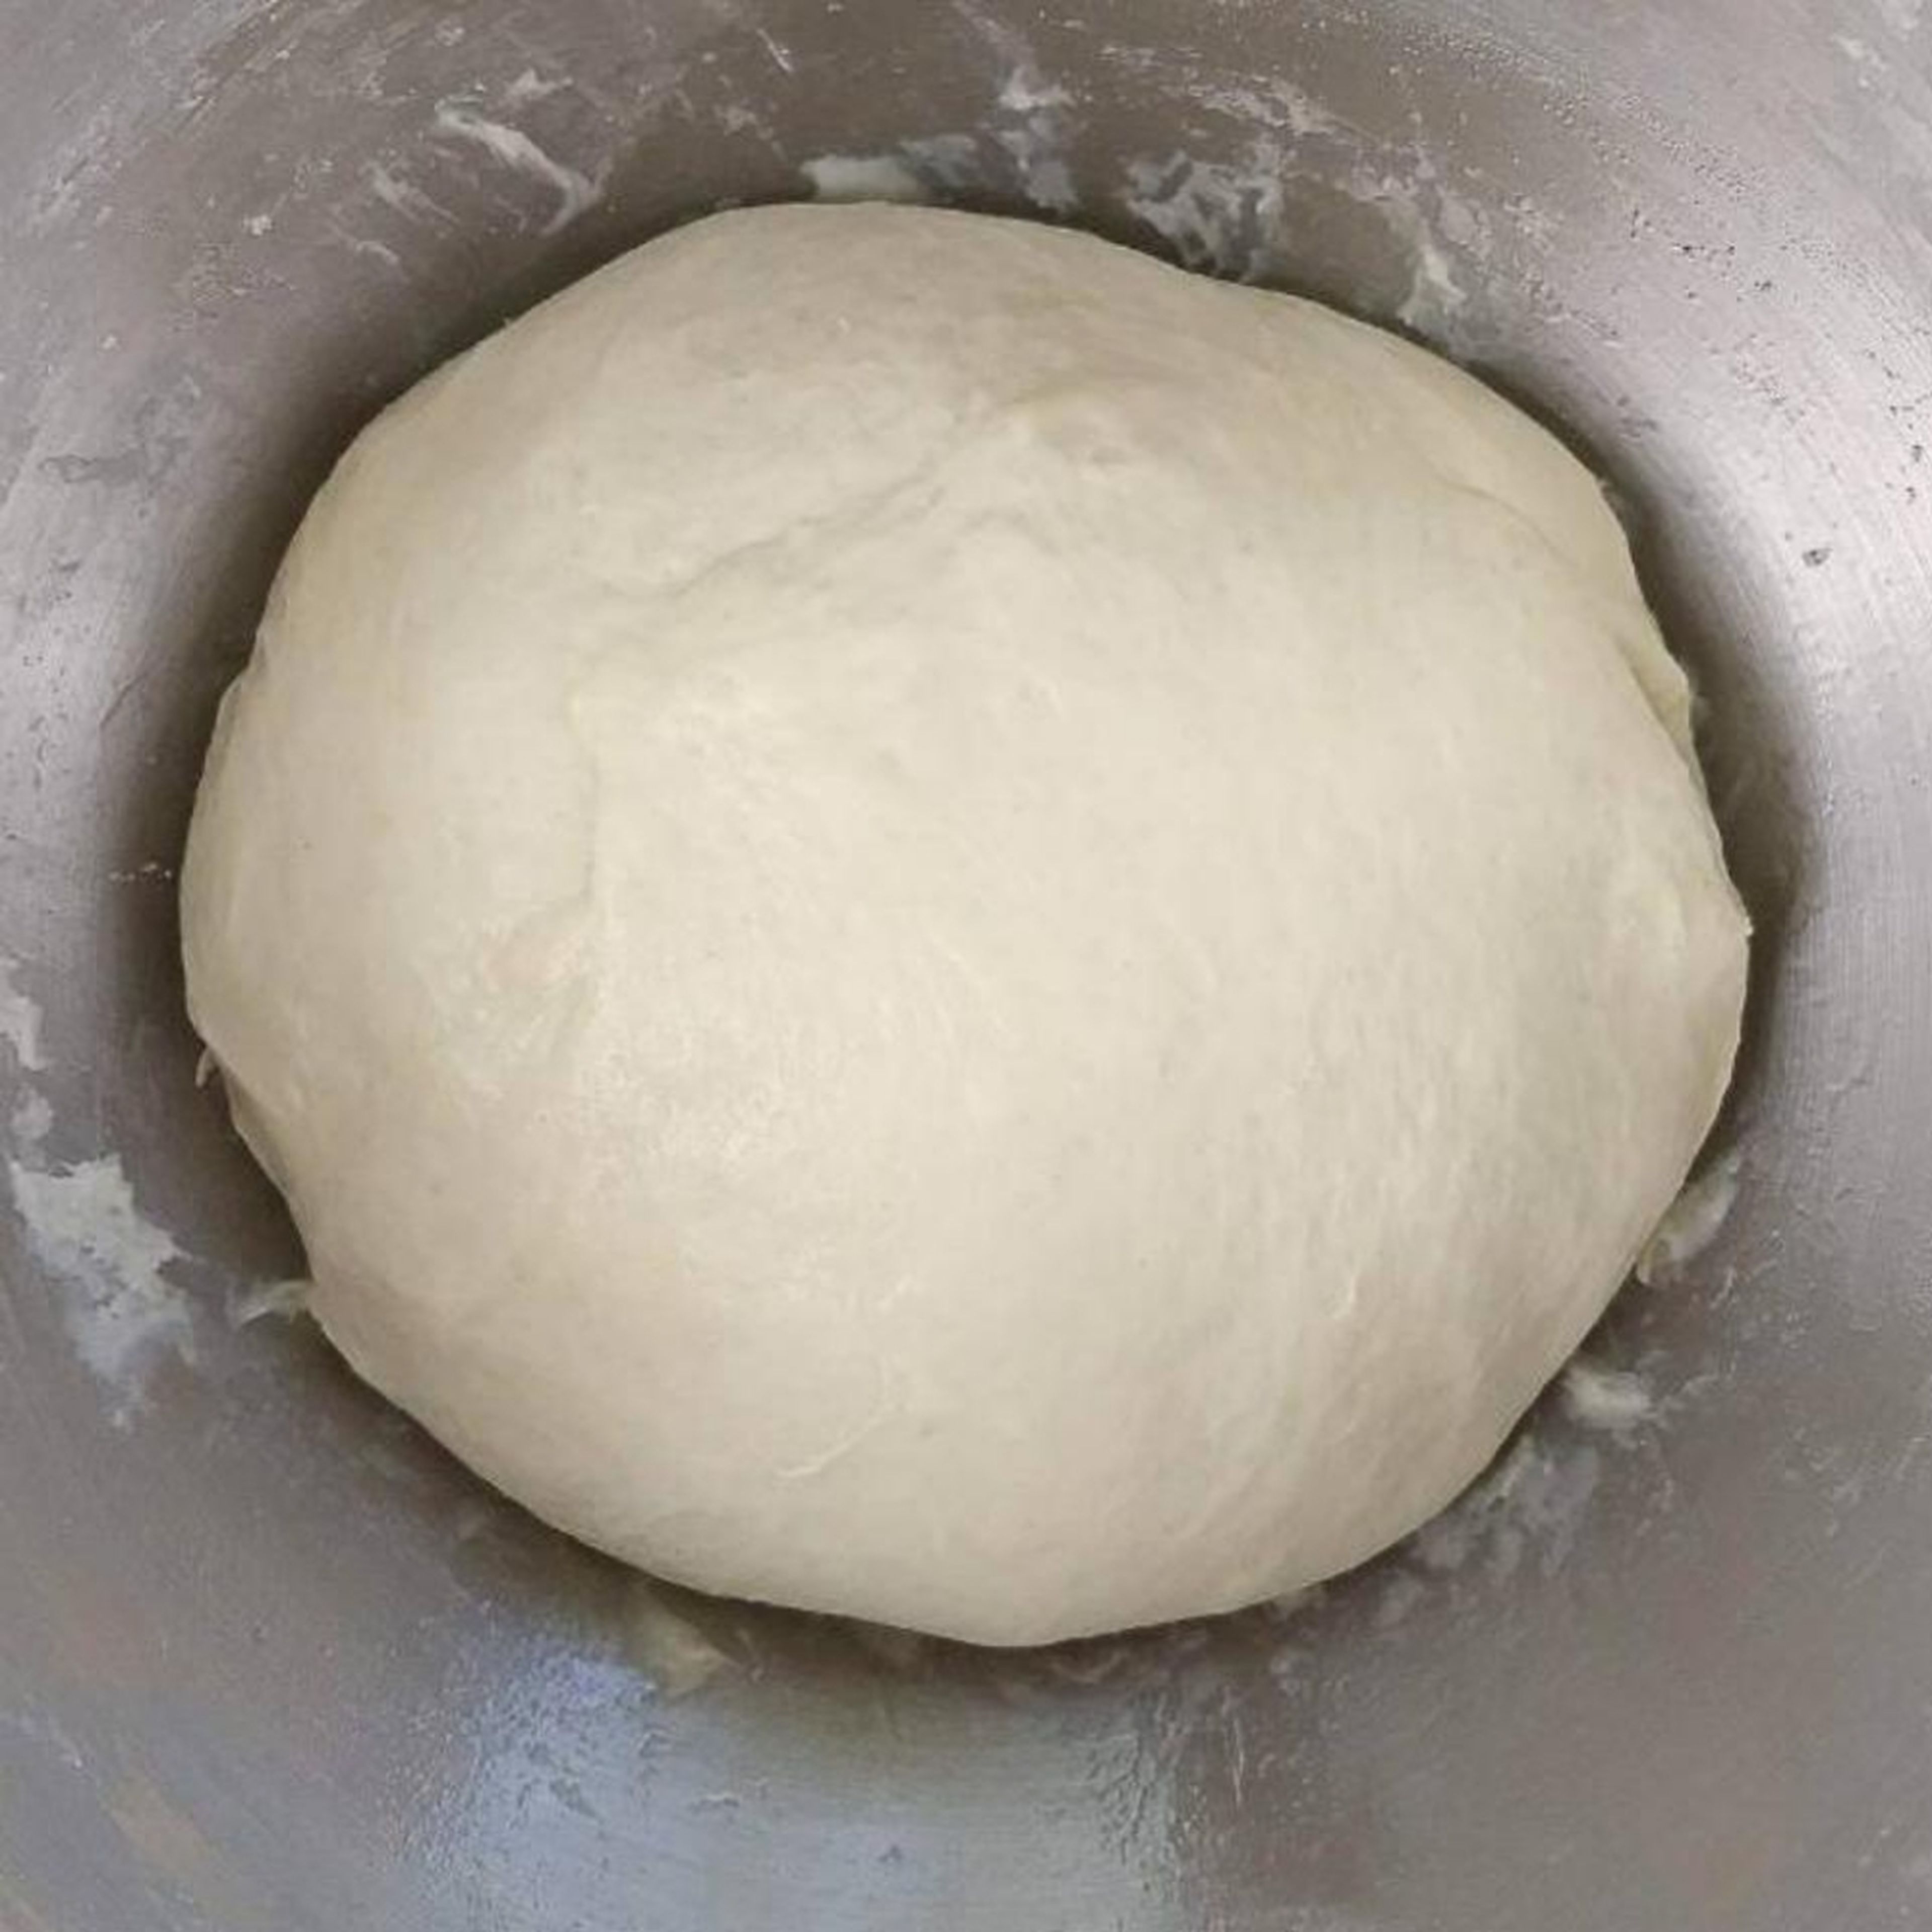 Put flour, warm water, 1 tbsp of olive oil, 1tsp of salt, 1 tsp of sugar and yeast in a bowl. Knead the dough with hands or automatically with yeast dough hooks for 10min. At the end it should look like a ball diverging from the sides of the bowl. It dpesnt matter if its a little sticky.